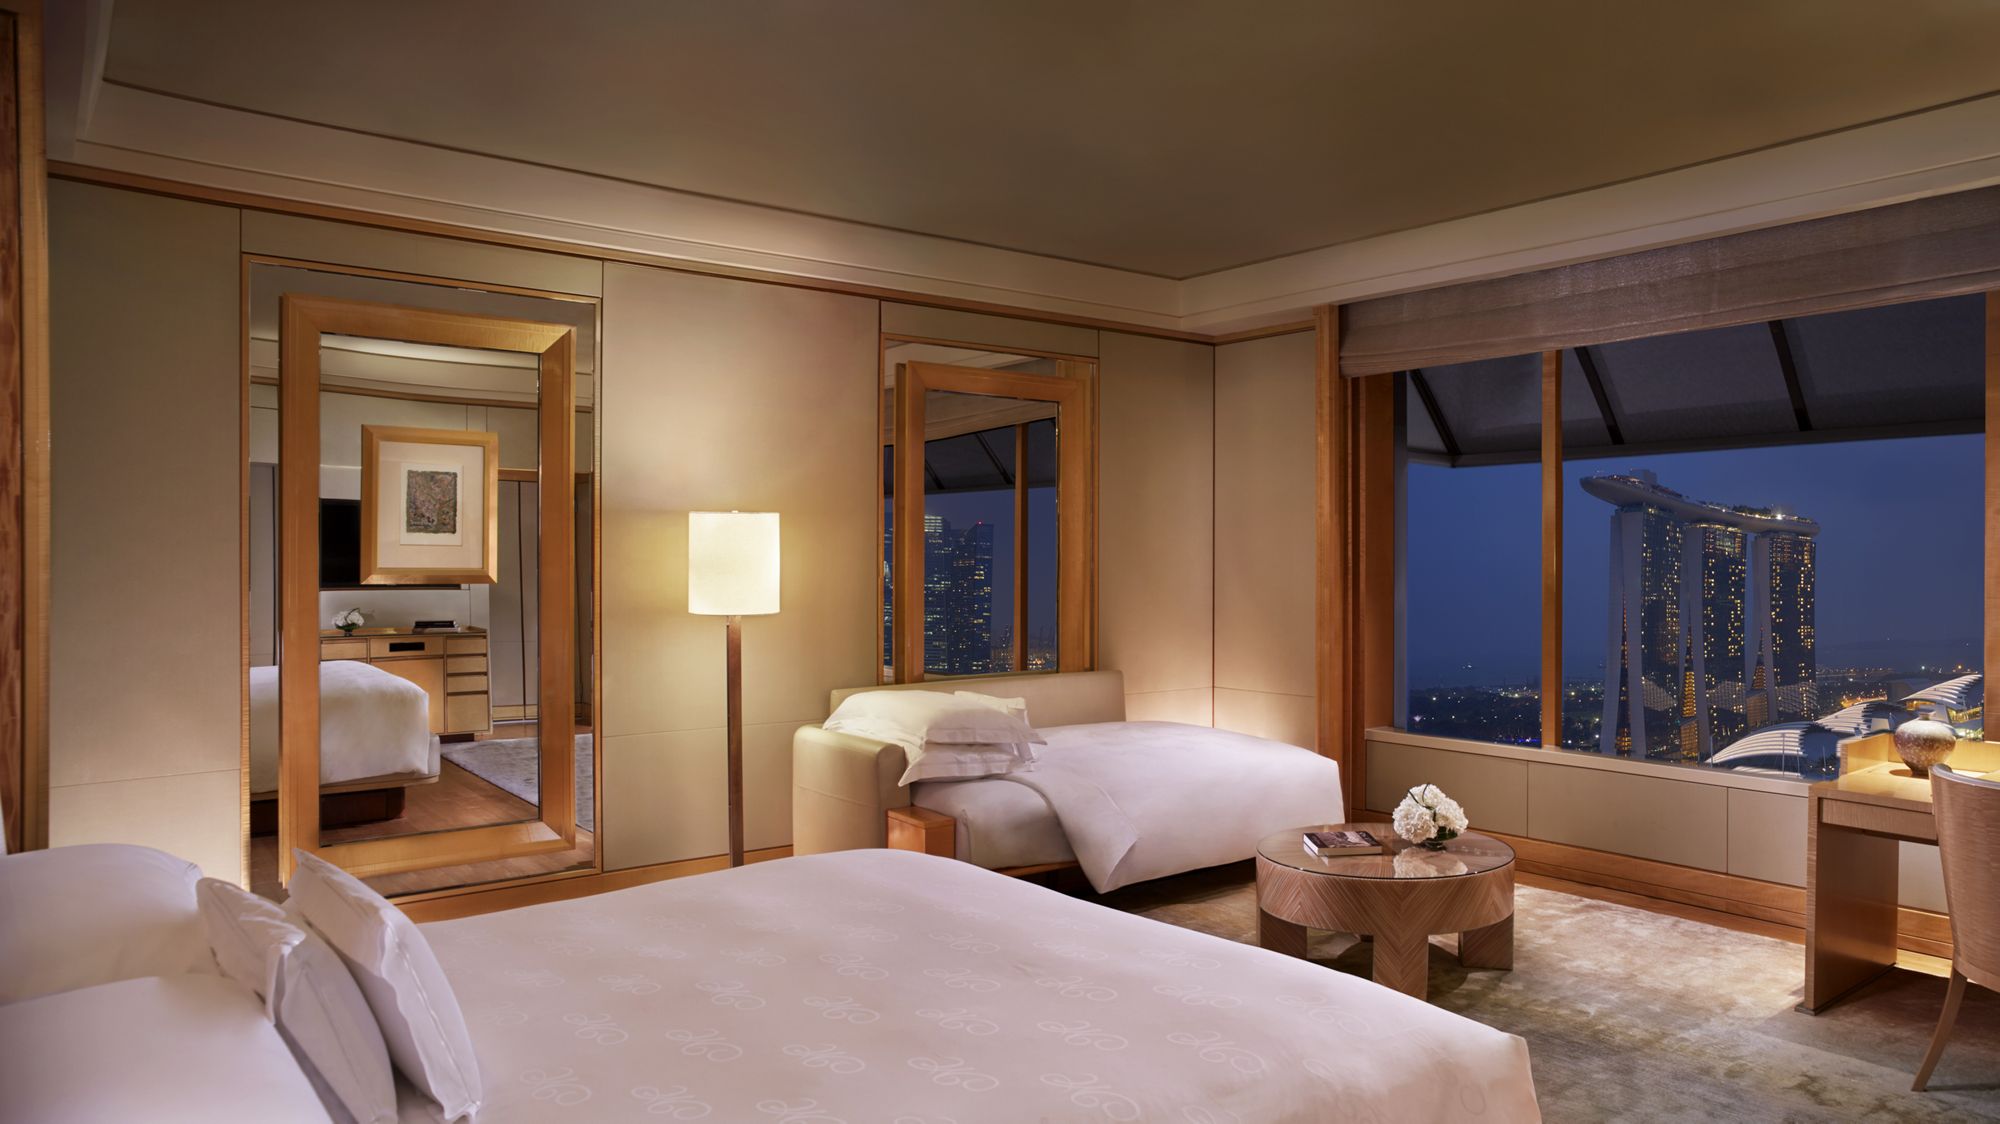 Guest room outfitted in honey-colored wood and carpet with wall-to-wall windows overlooking city lights in the evening